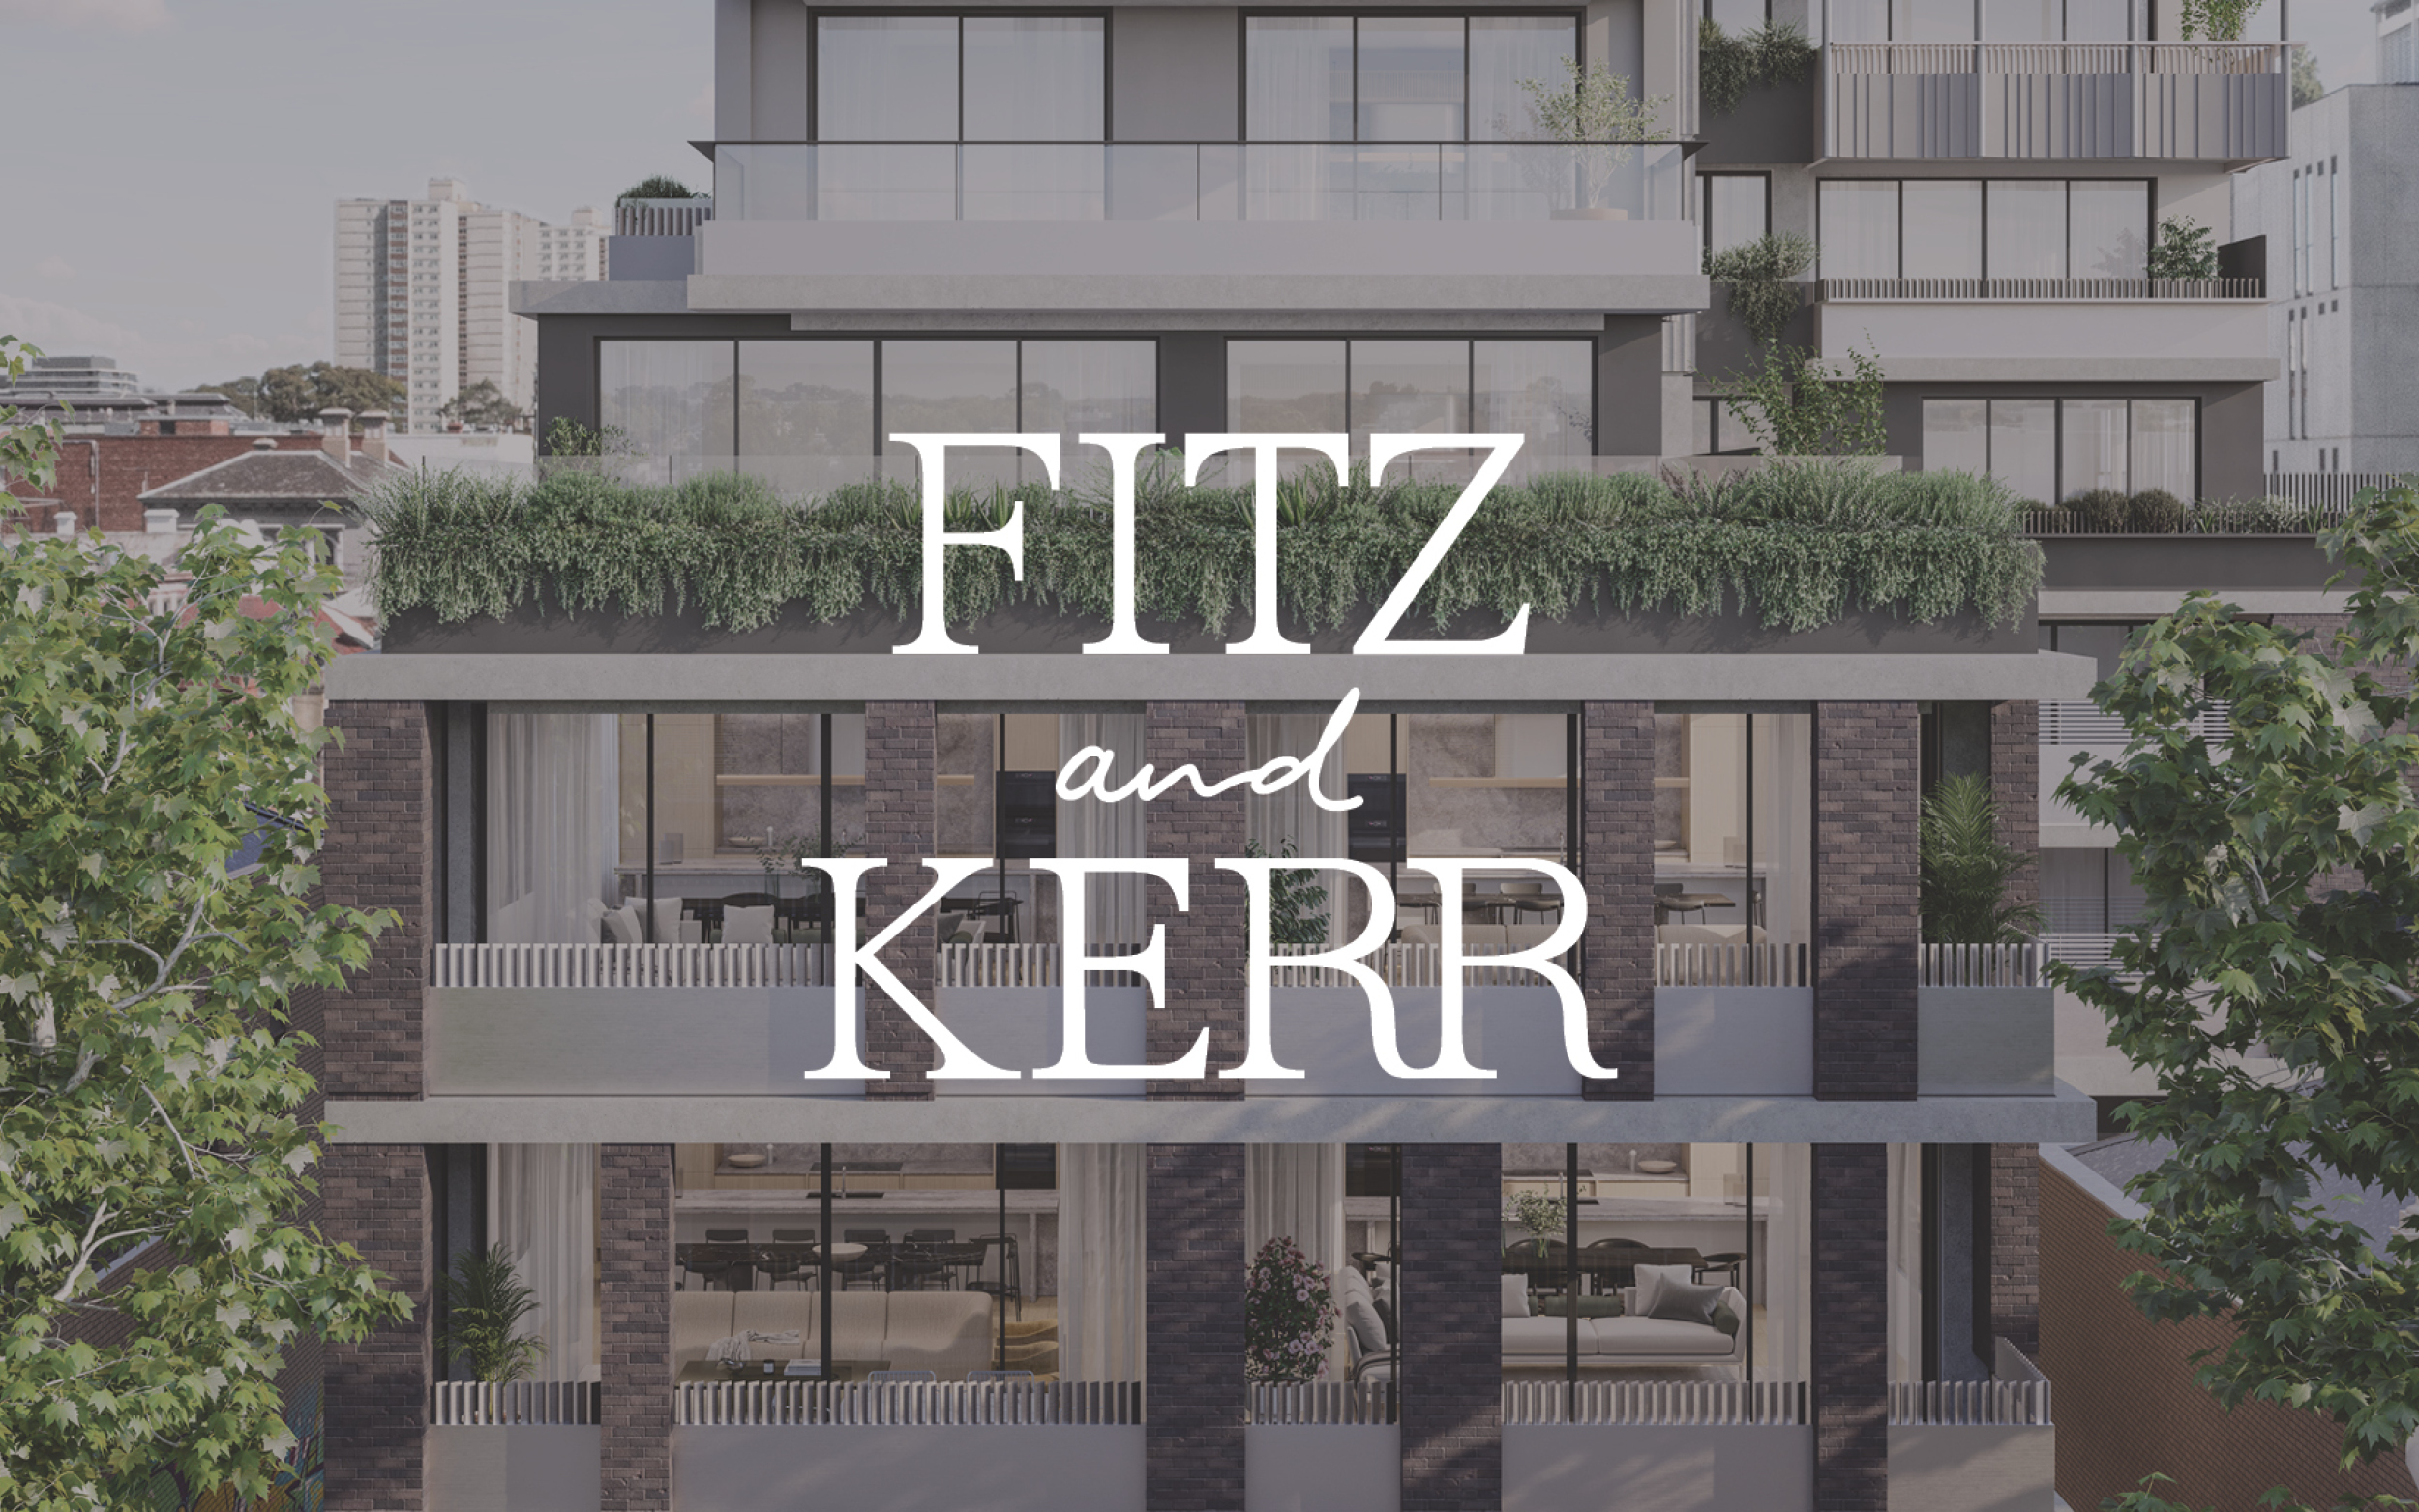 Fitz and Kerr logo over building render